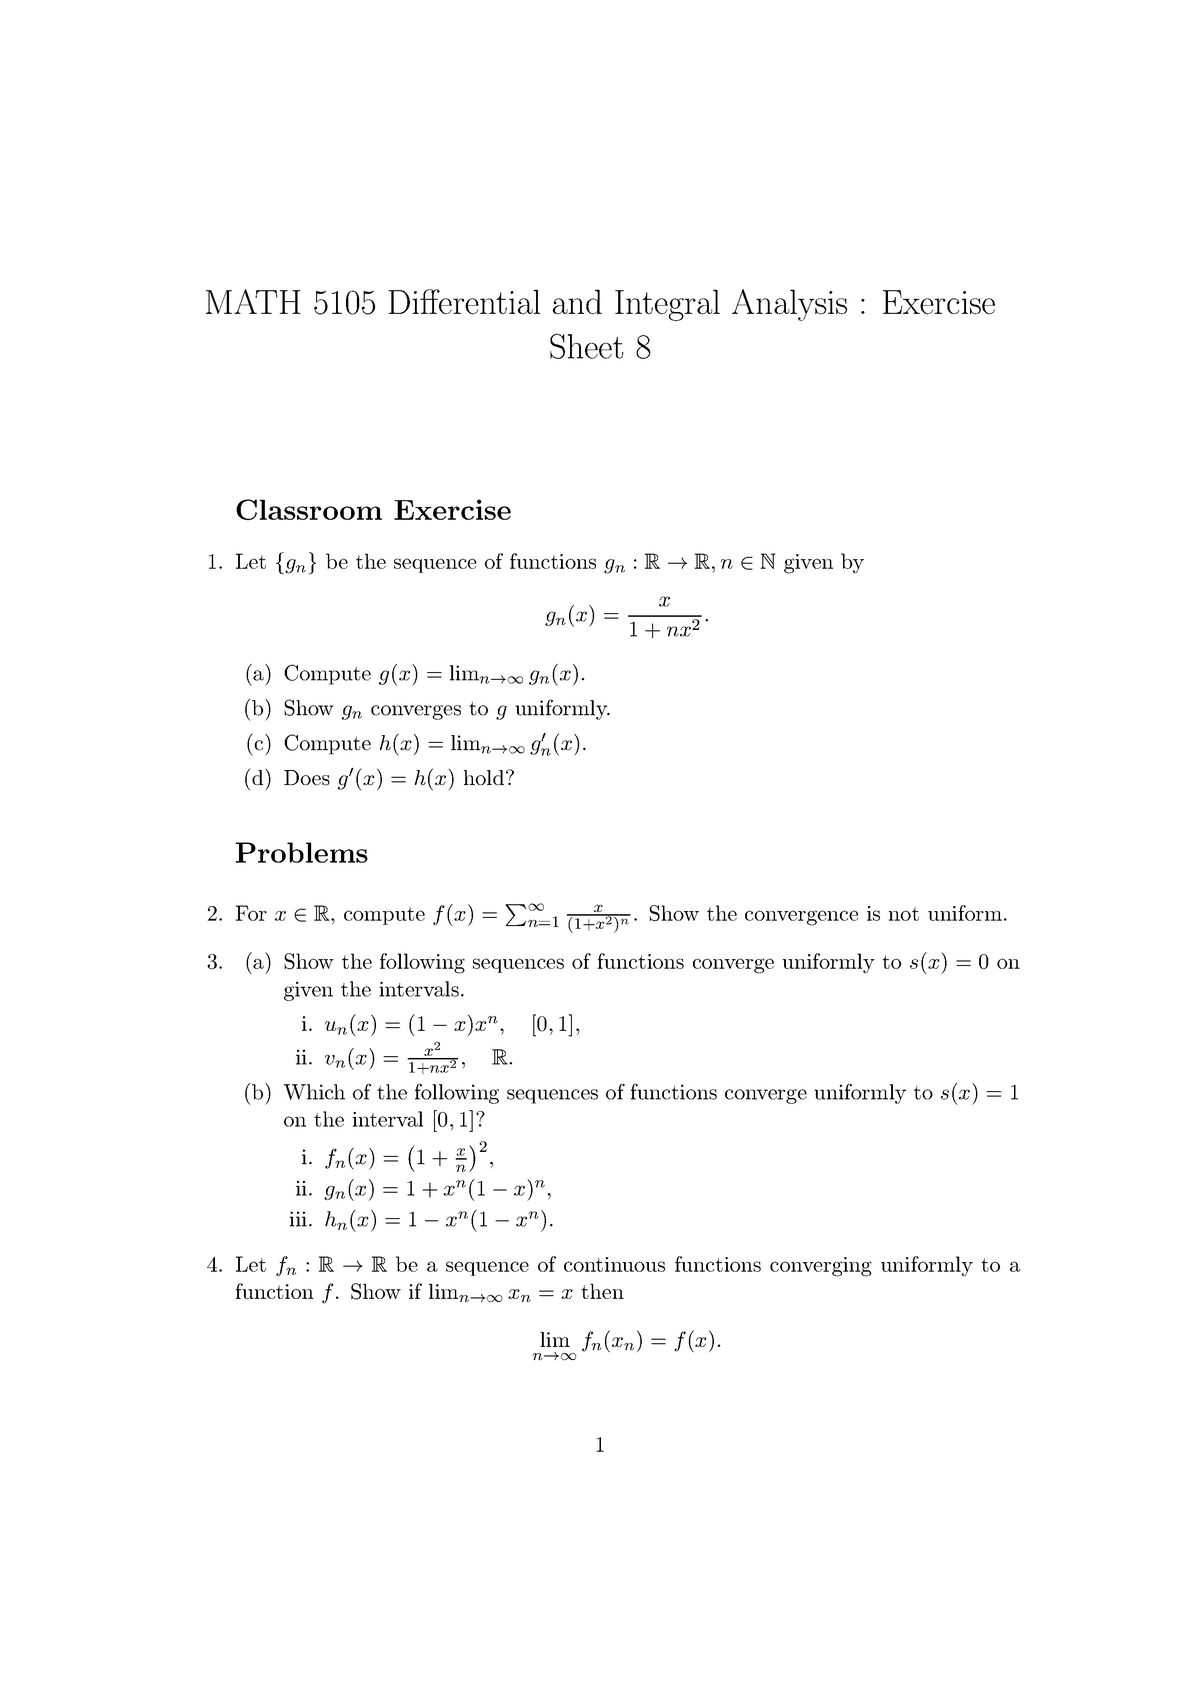 course-worksheet-8-differential-and-integral-analysis-math-5105-differential-and-integral